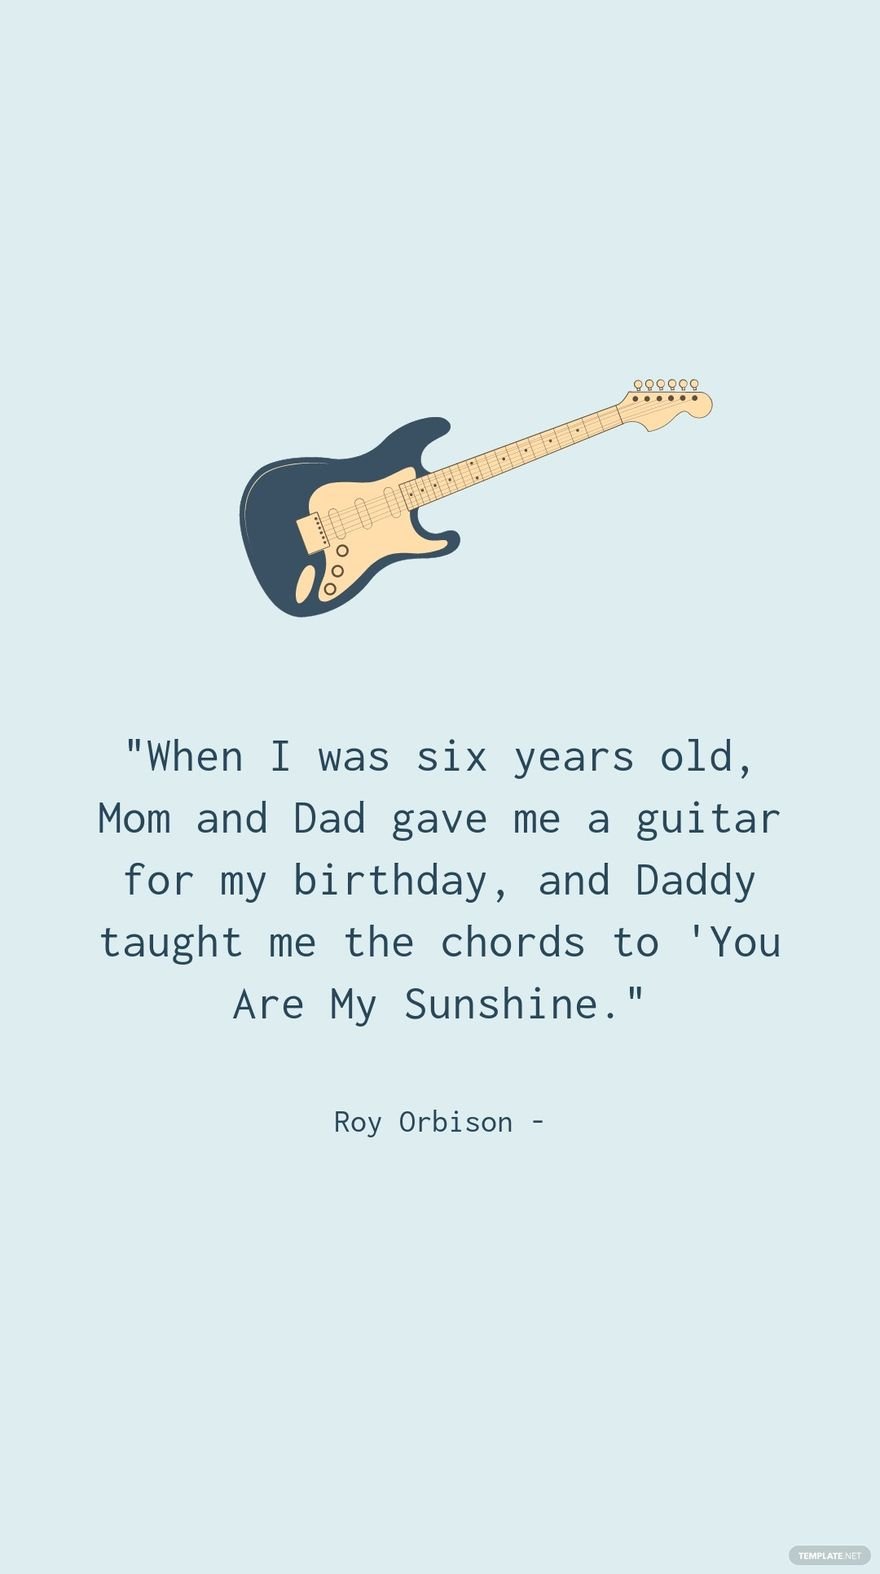 Roy Orbison - When I was six years old, Mom and Dad gave me a guitar for my birthday, and Daddy taught me the chords to 'You Are My Sunshine.